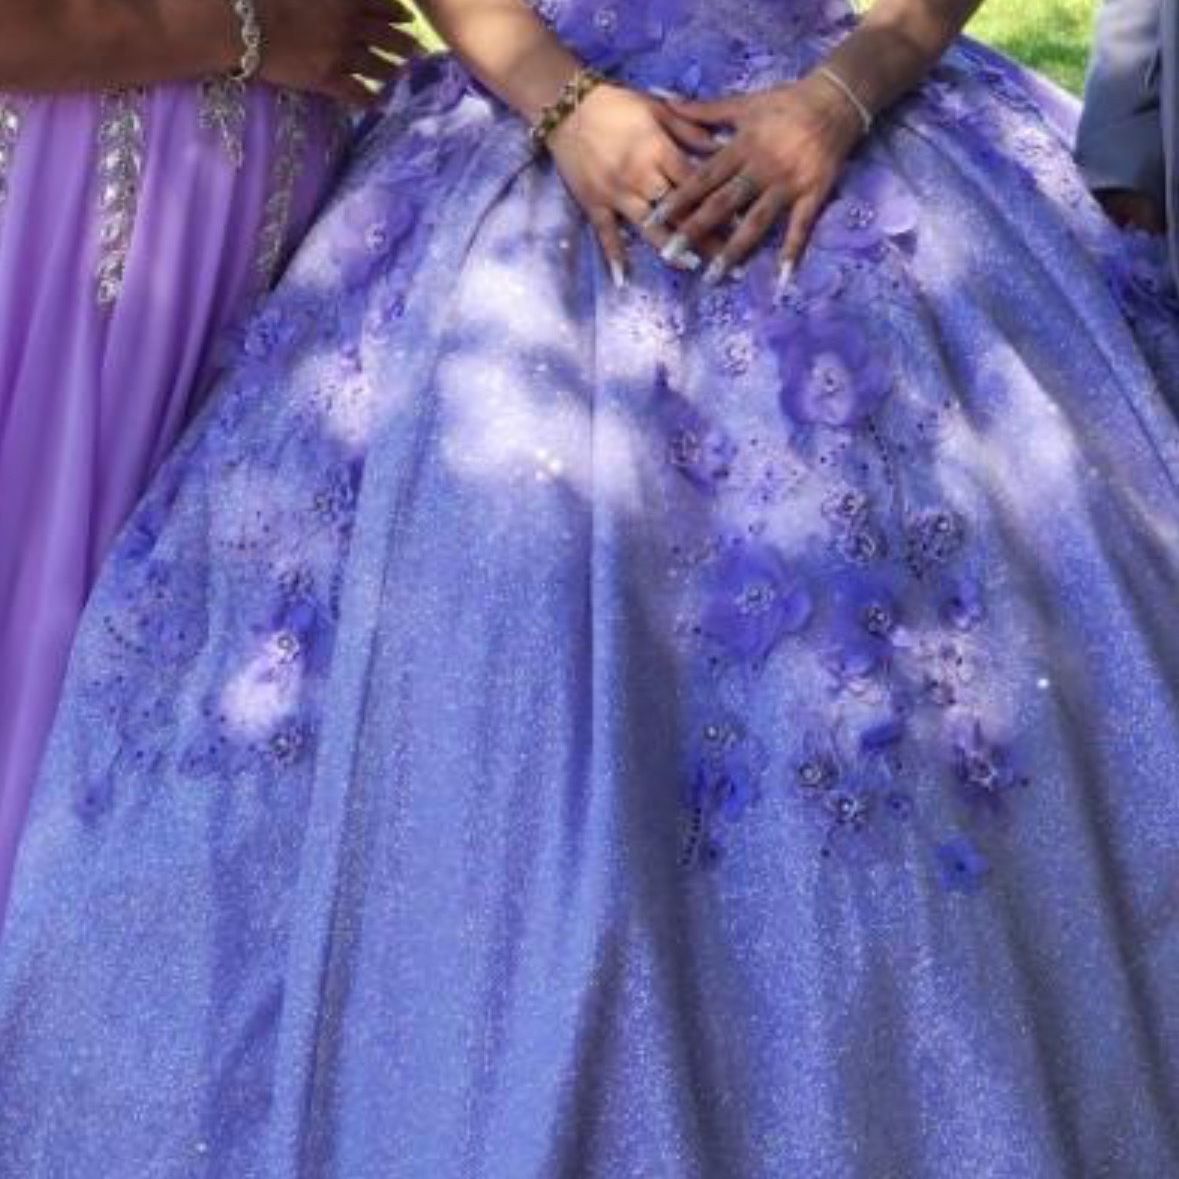 quince dress 